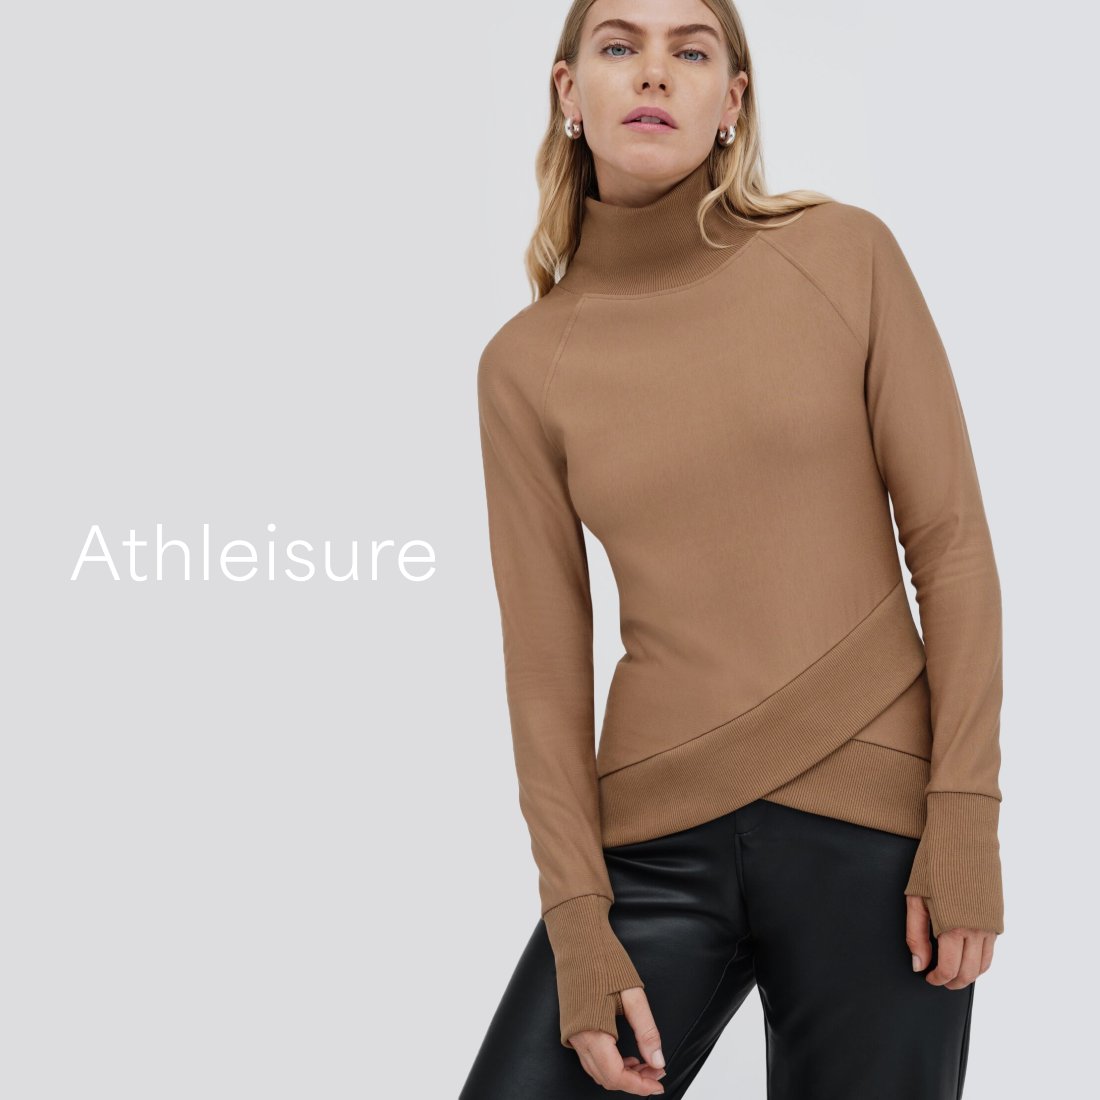 House Of Cb Allegra Asymmetric Pu Leather And Cotton-blend Top in